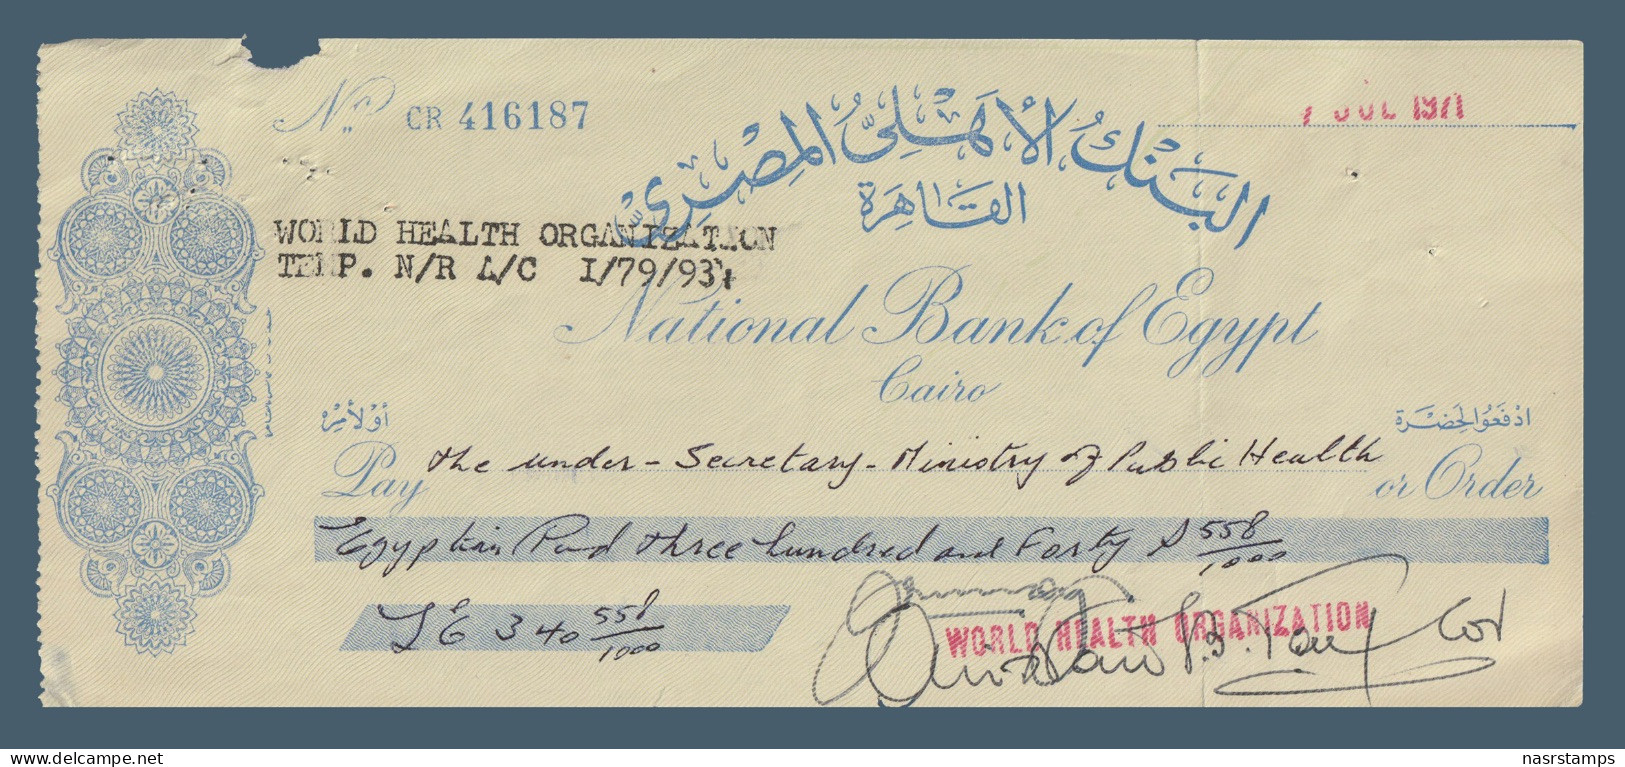 Egypt - 1971 - Vintage Check - ( National Bank Of Egypt ) - Cheques En Traveller's Cheques